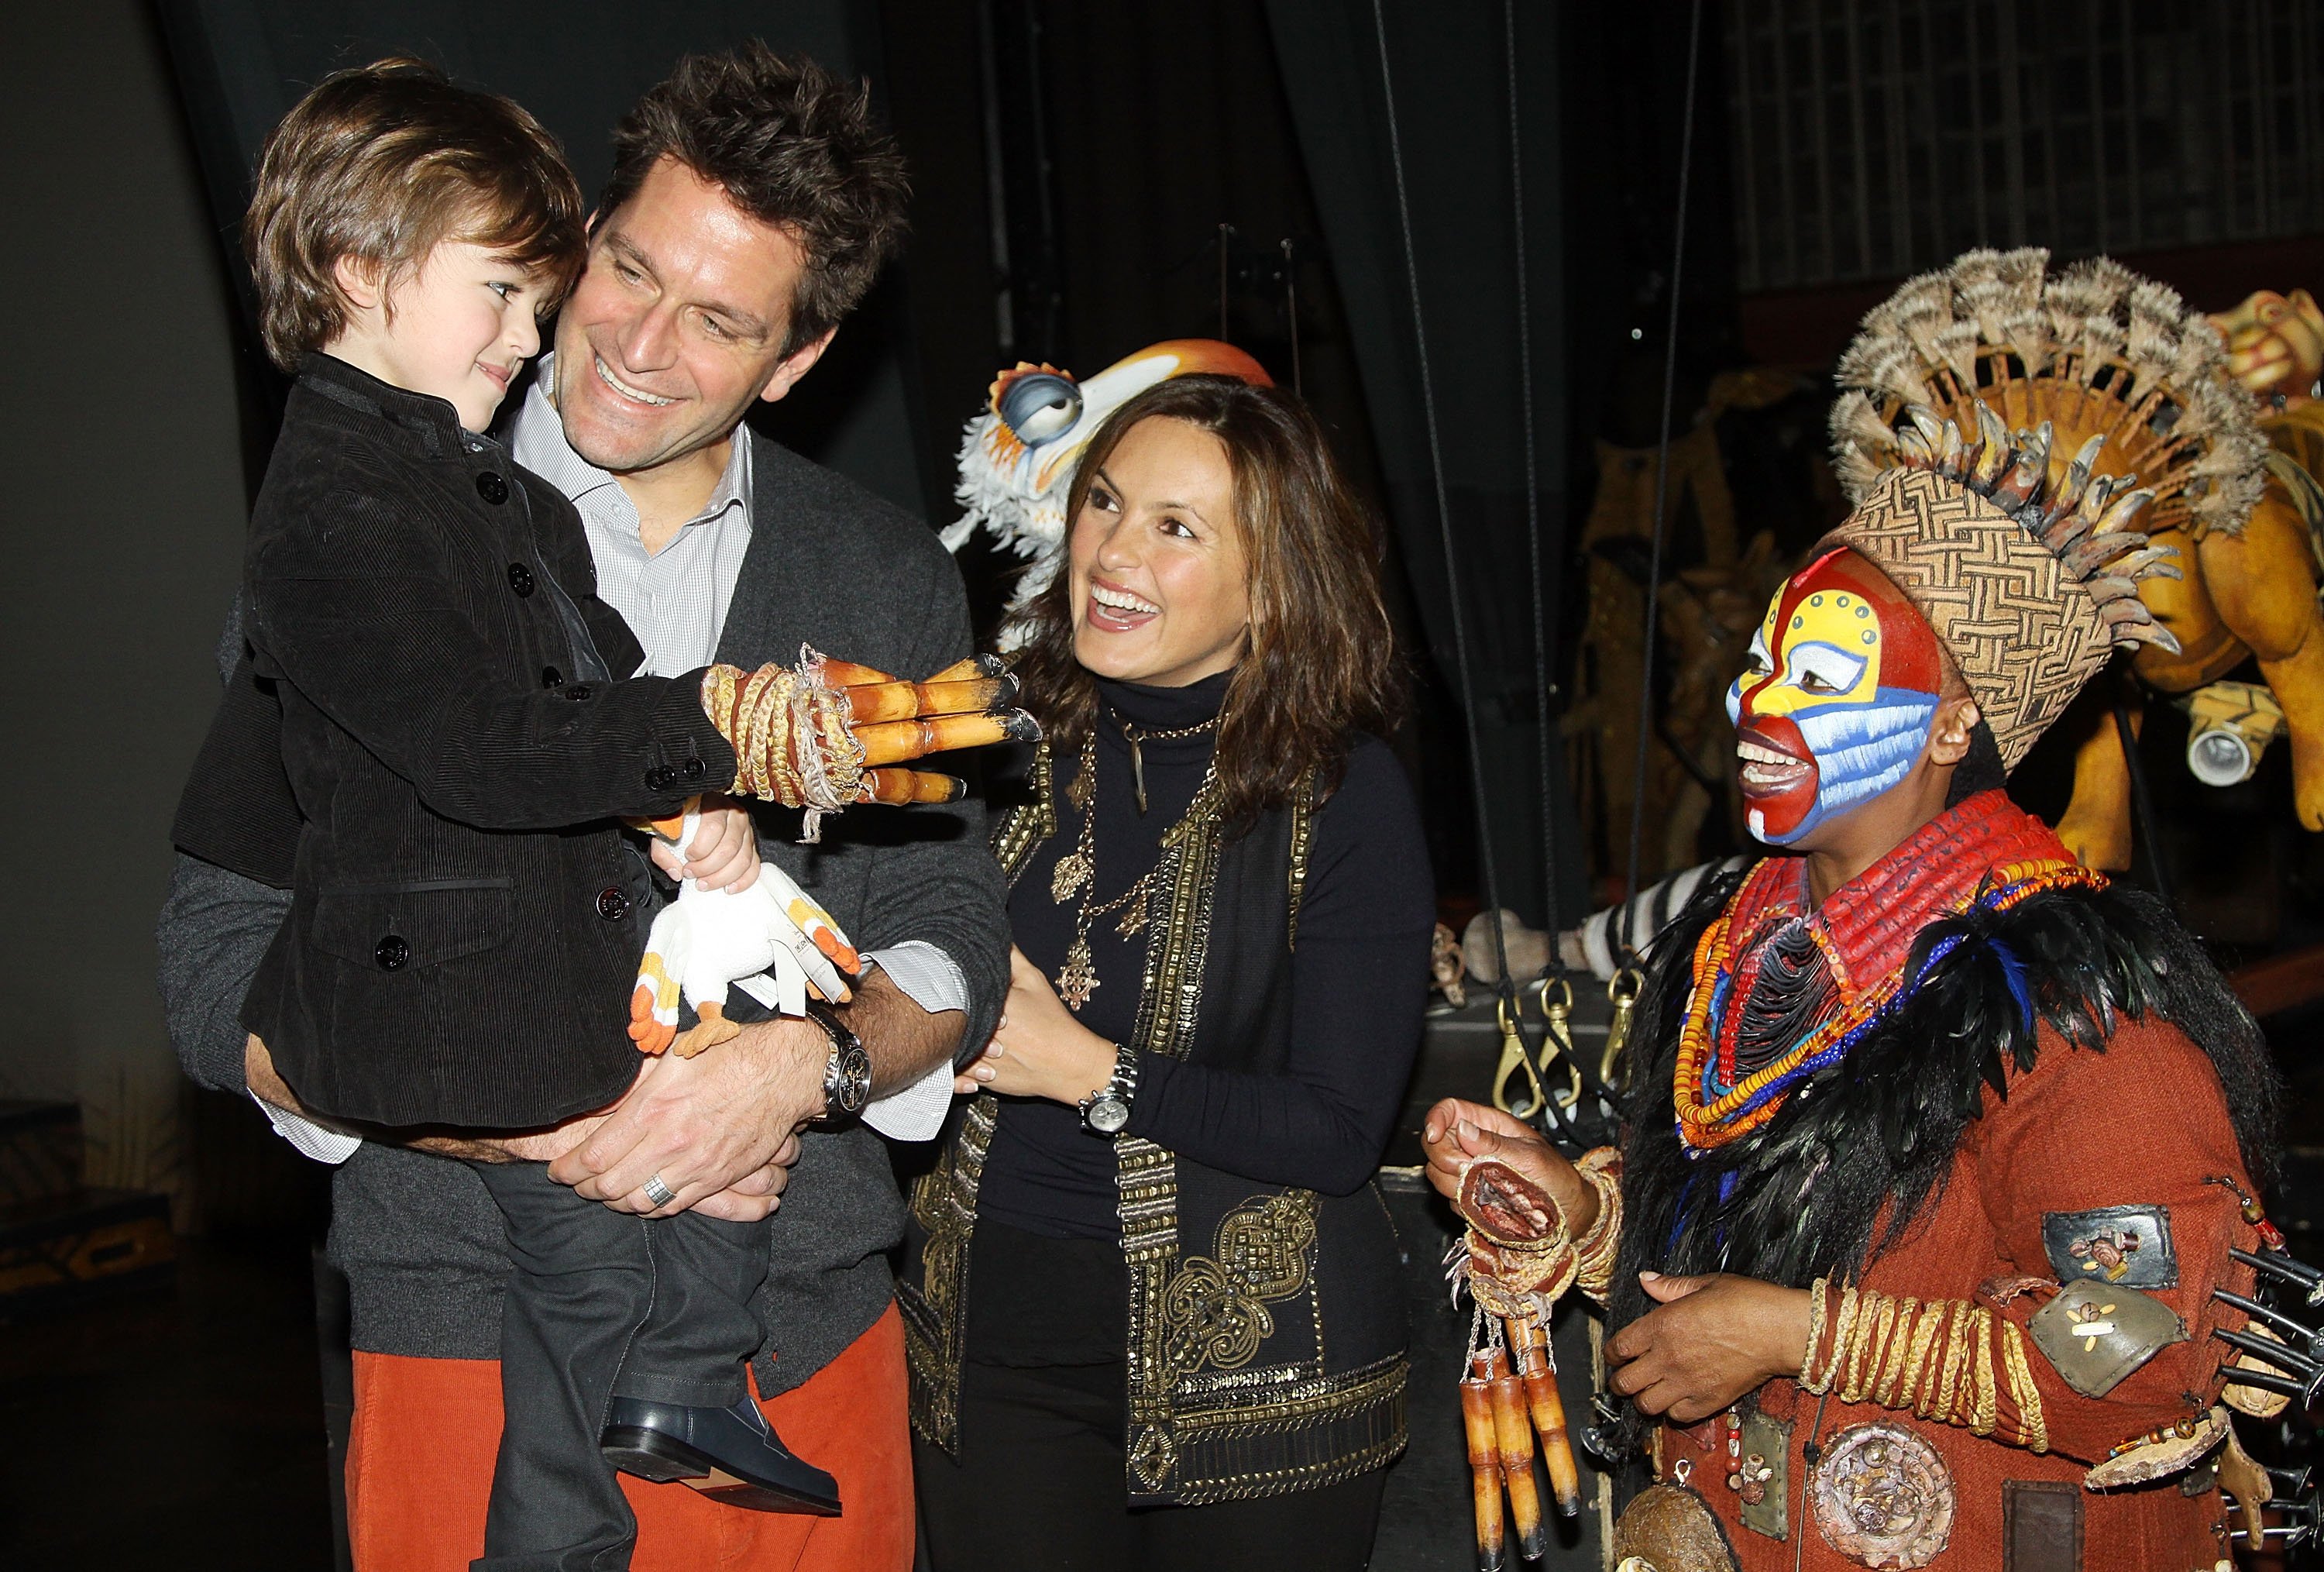 August Hermann, father Peter Hermann, Mariska Hargitay and Tshidi Manye who plays "Rafiki" backstage at "Disney's The Lion King" on Broadway at The Minskoff Theater on December 11, 2010 in New York City. | Source: Getty Images